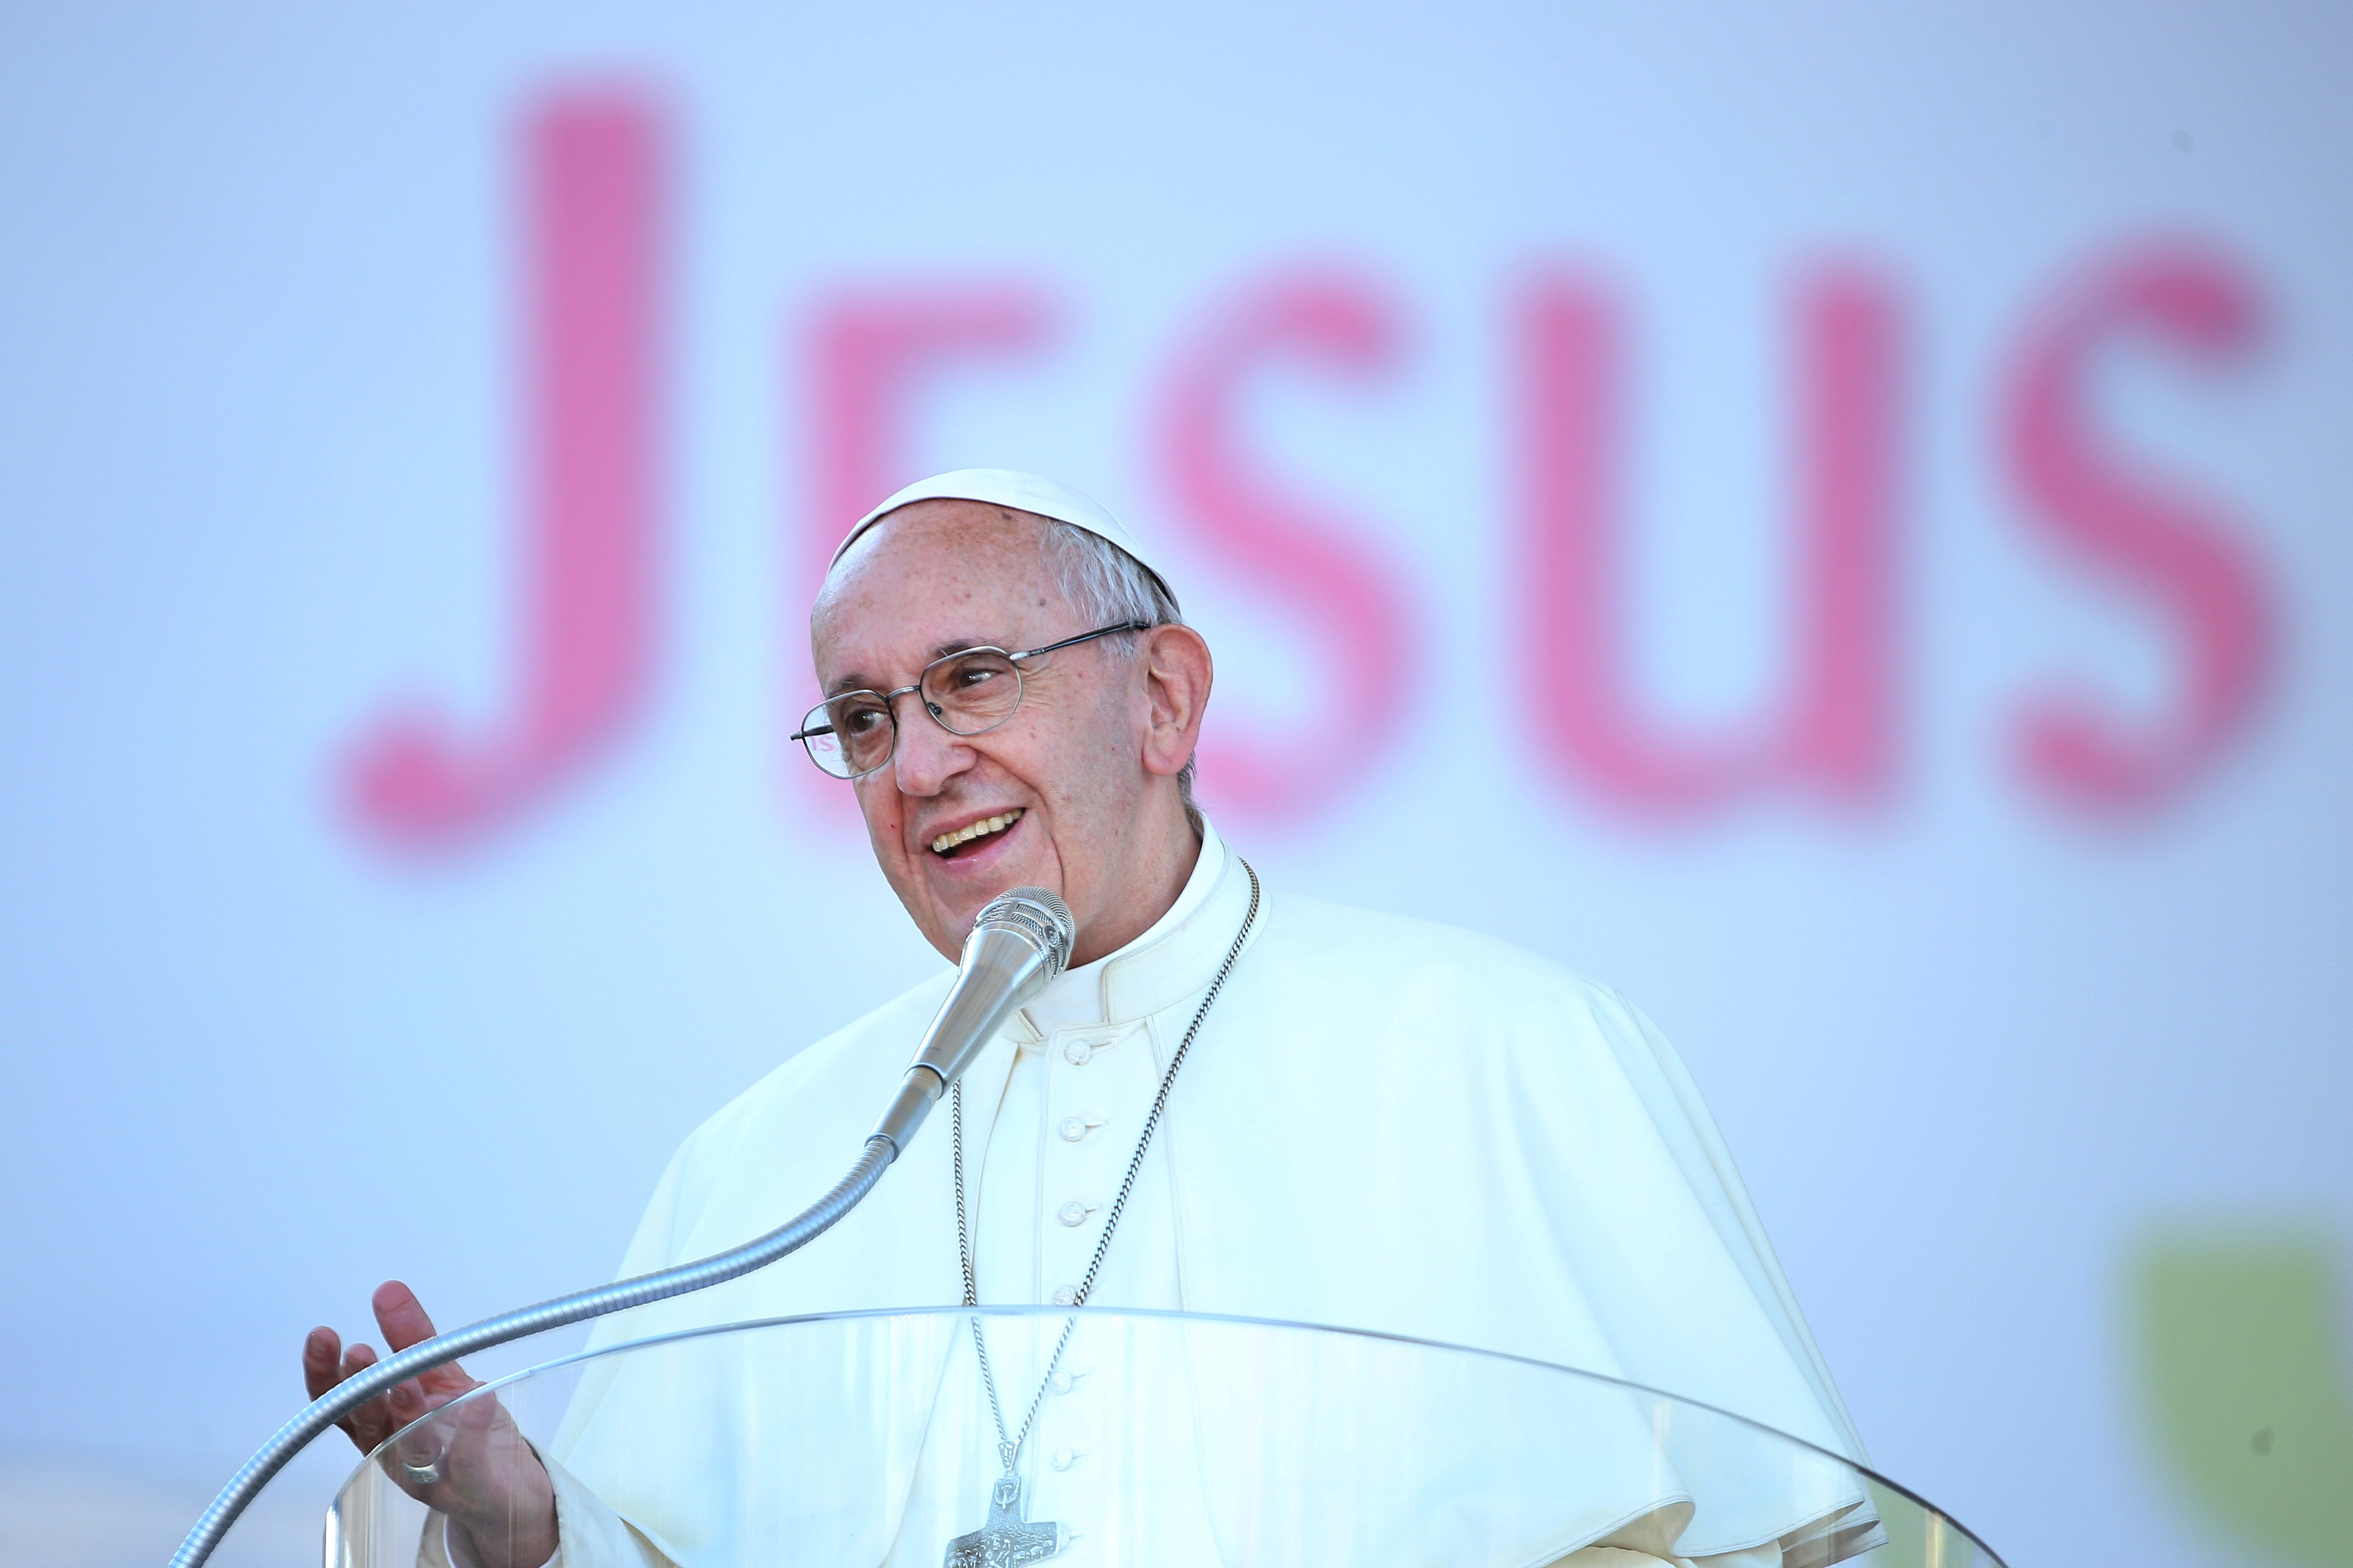 Pope Attends The Golden Jubilee at the Circo Massimo